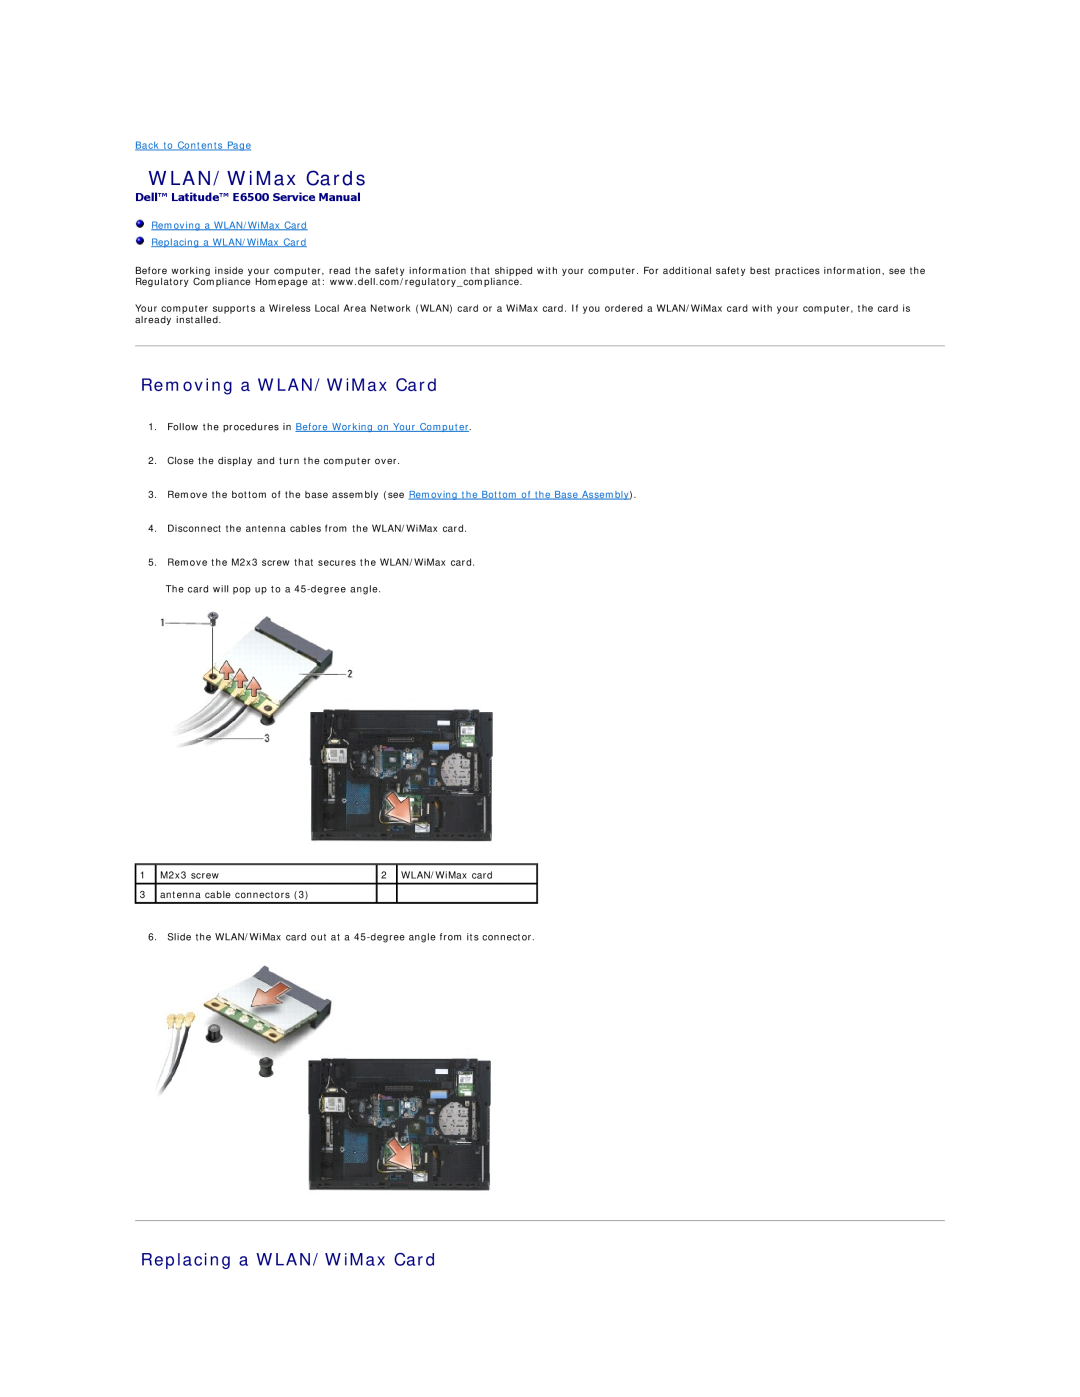 Dell WLAN/WiMax Cards, Removing a WLAN/WiMax Card, Replacing a WLAN/WiMax Card, Dell Latitude E6500 Service Manual 